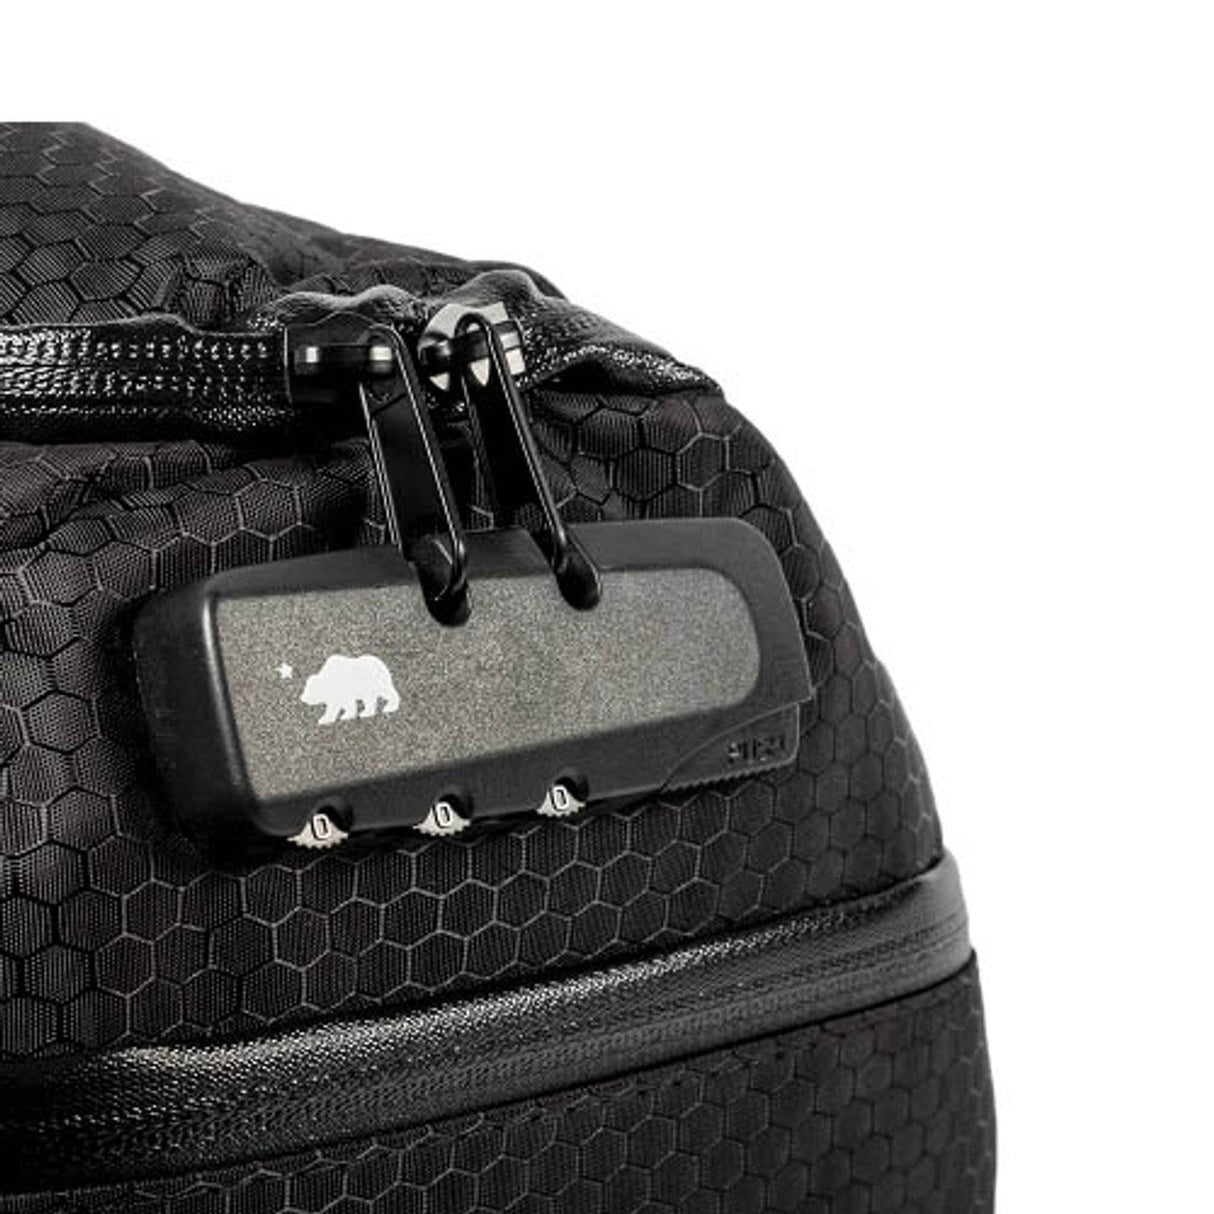 Close-up of Cali Duffle® 16" Standard's silicone tag on black textured bag by Cali Crusher